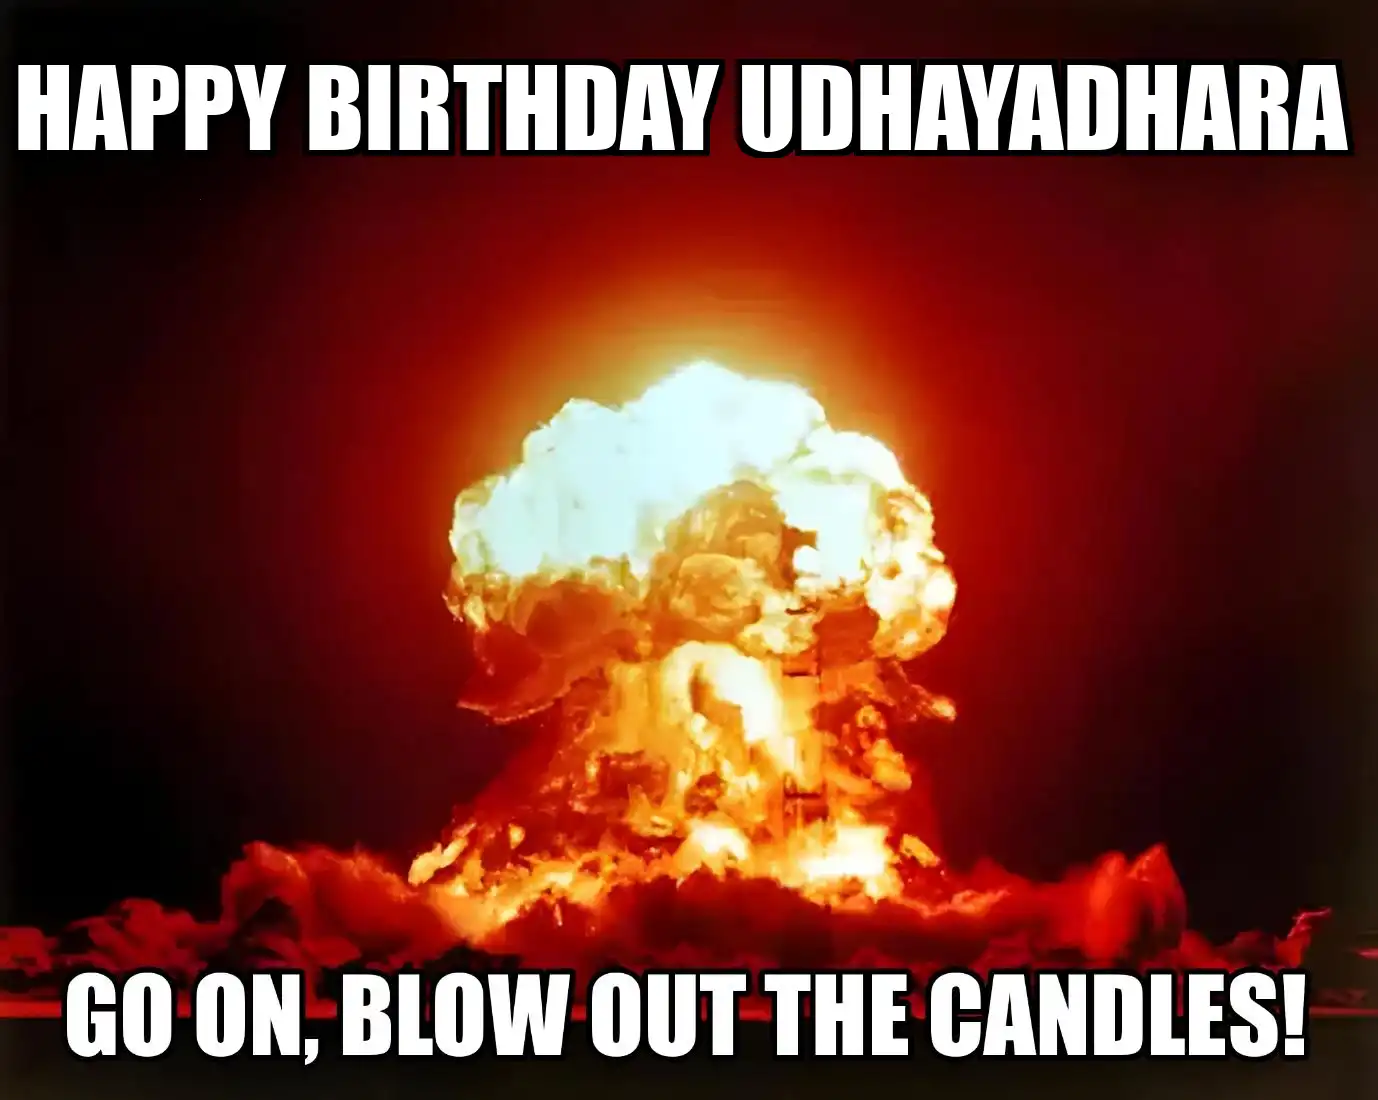 Happy Birthday Udhayadhara Go On Blow Out The Candles Meme